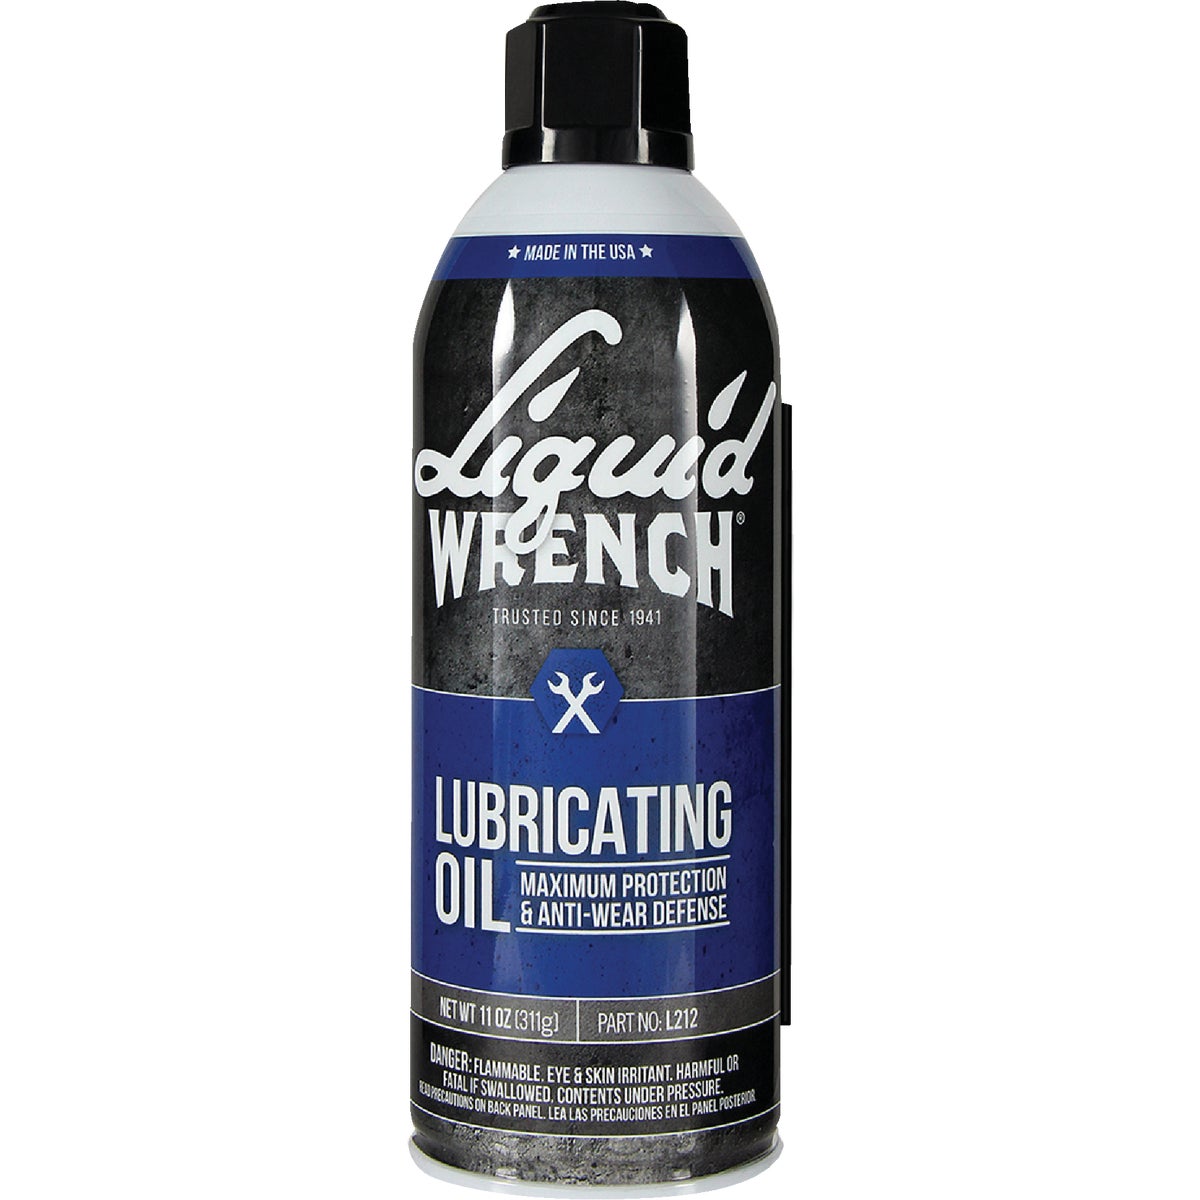 Item 430402, A multipurpose product; it lubricates, it protects, it penetrates.